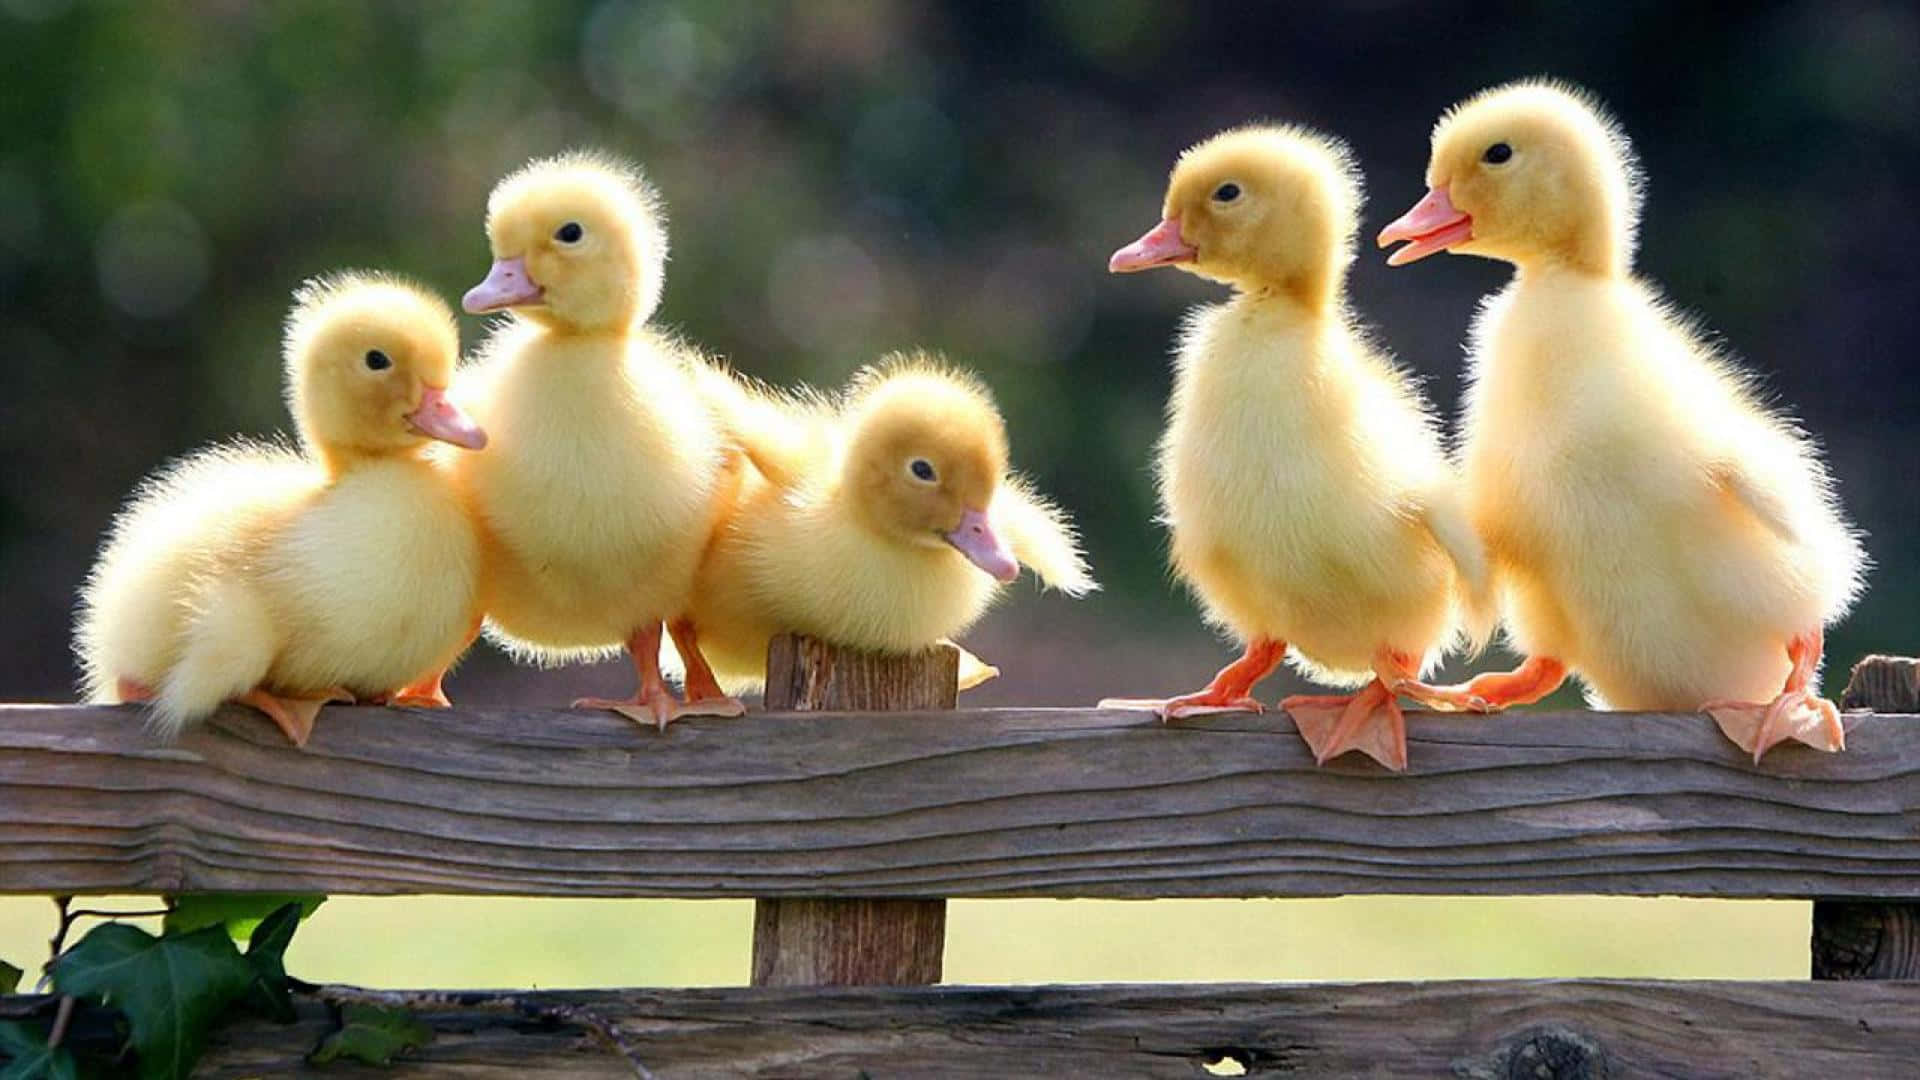 This Cute And Cuddly Duck Will Keep You Company!